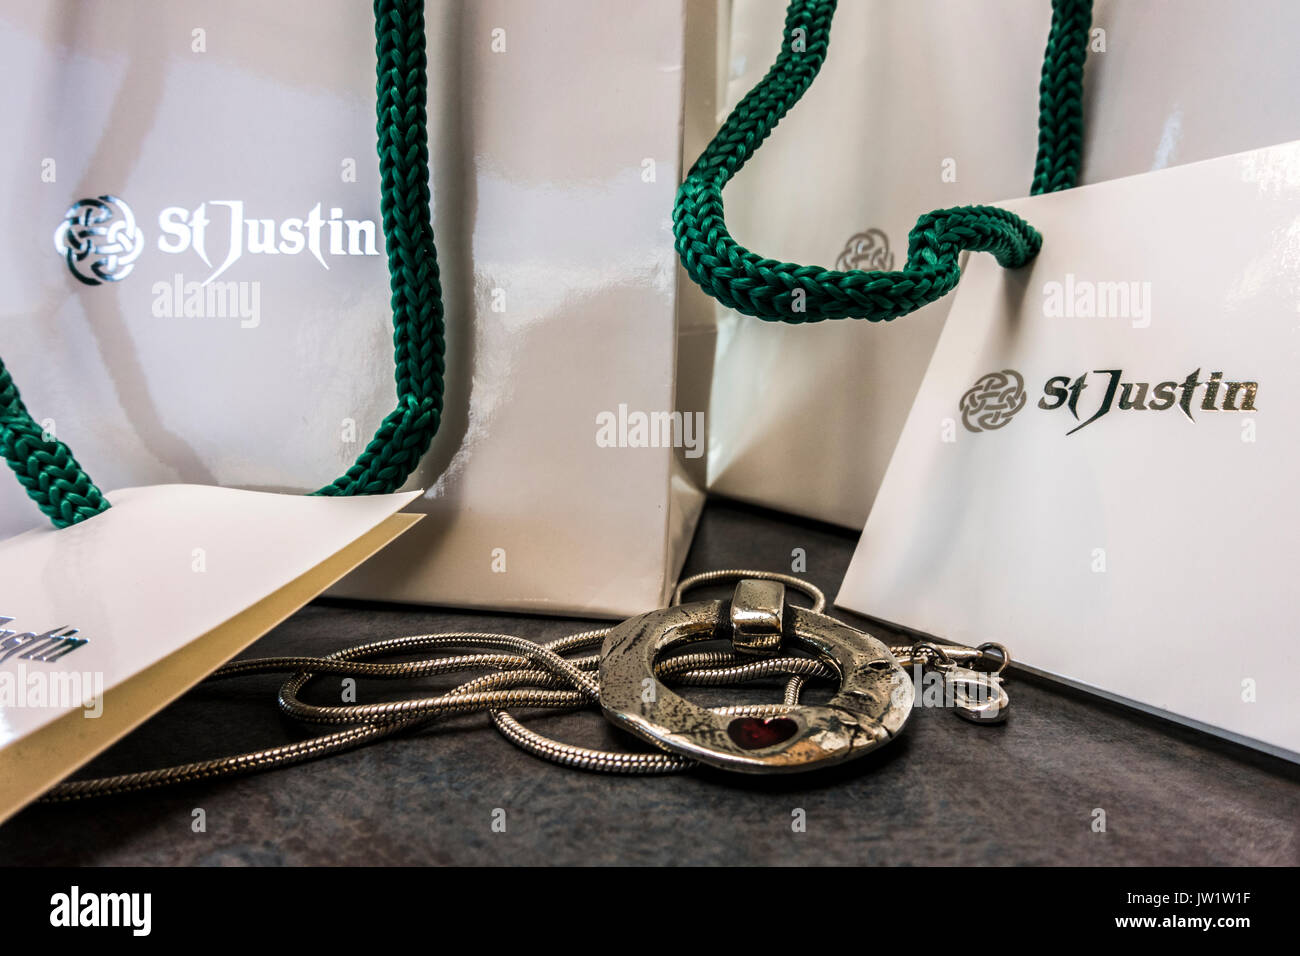 A love circle pendant hand crafted by St Justin of Penzance, Cornwall, England, UK, alongside the shop's presentation bags. Stock Photo